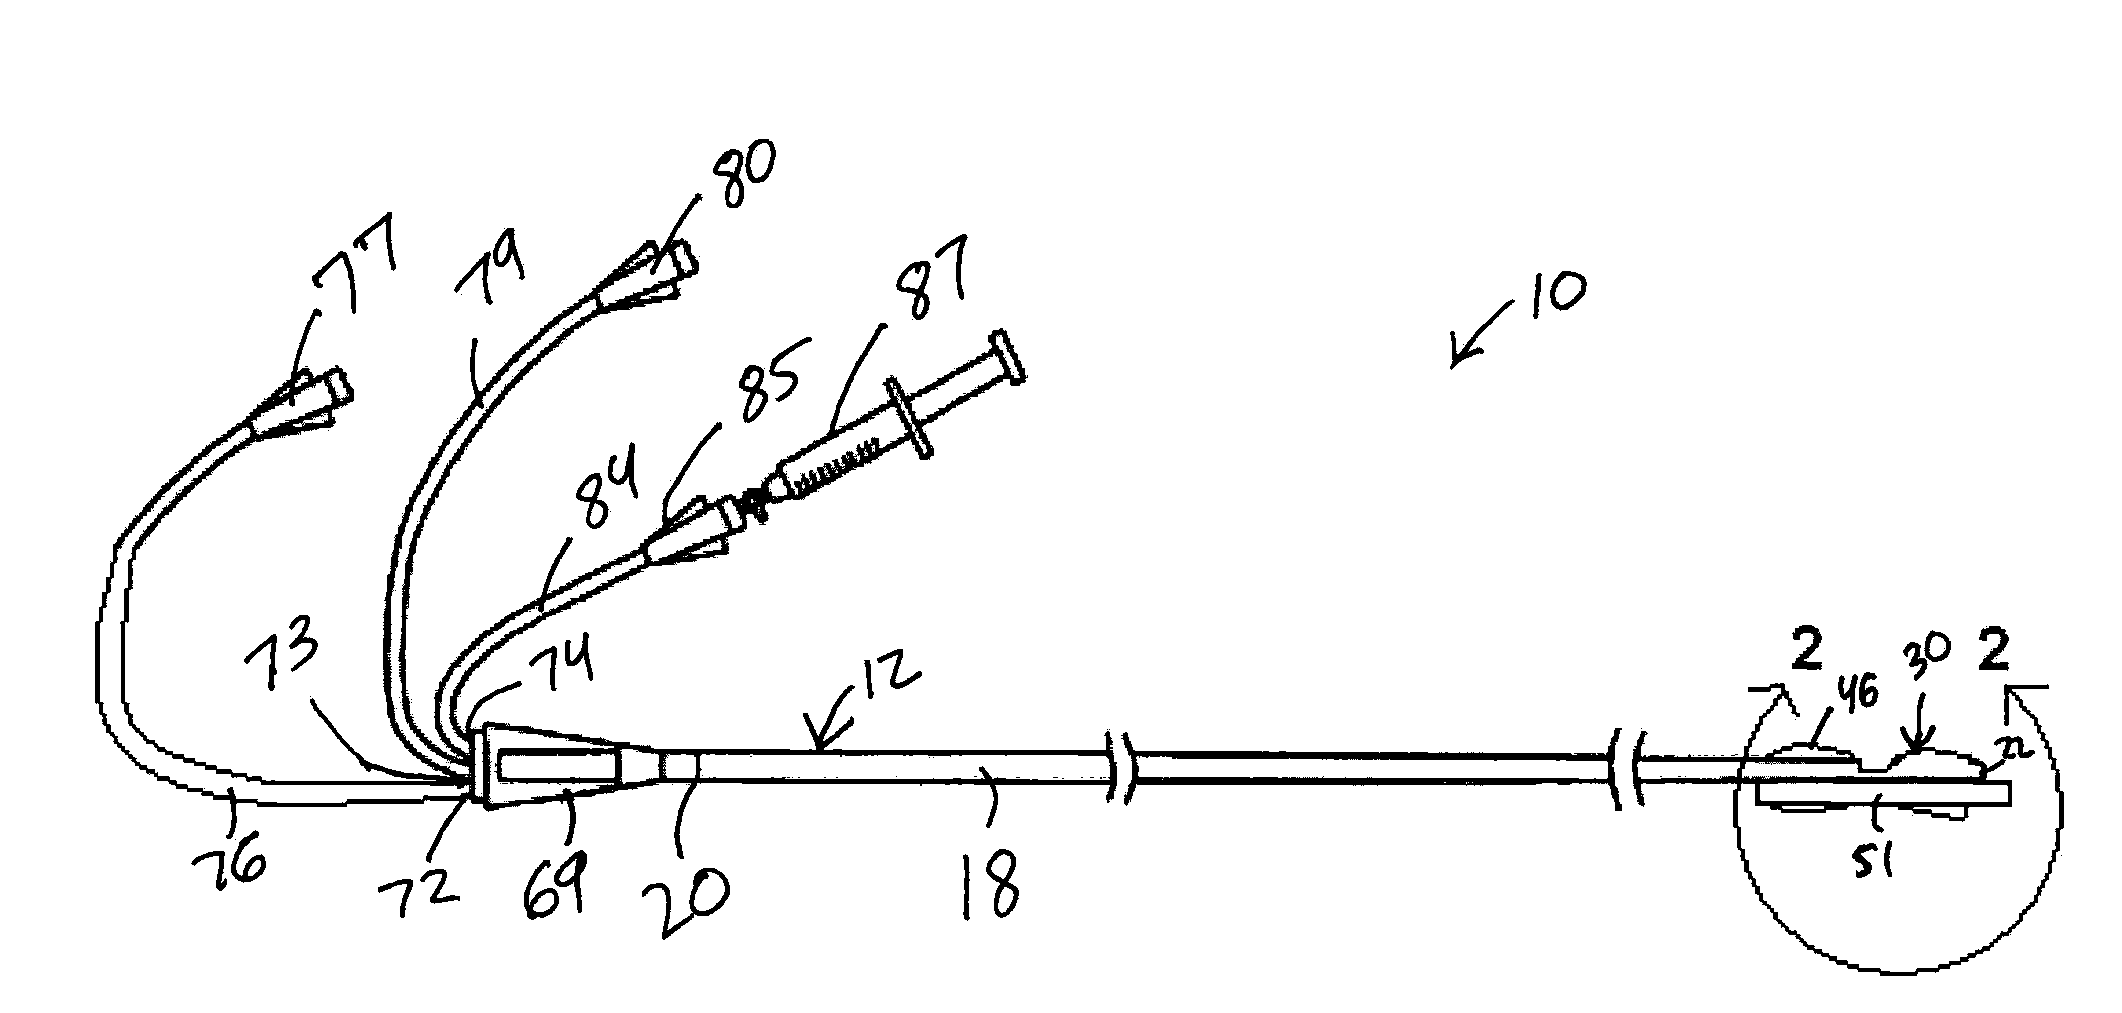 Thrombectomy and Balloon Angioplasty/Stenting Device